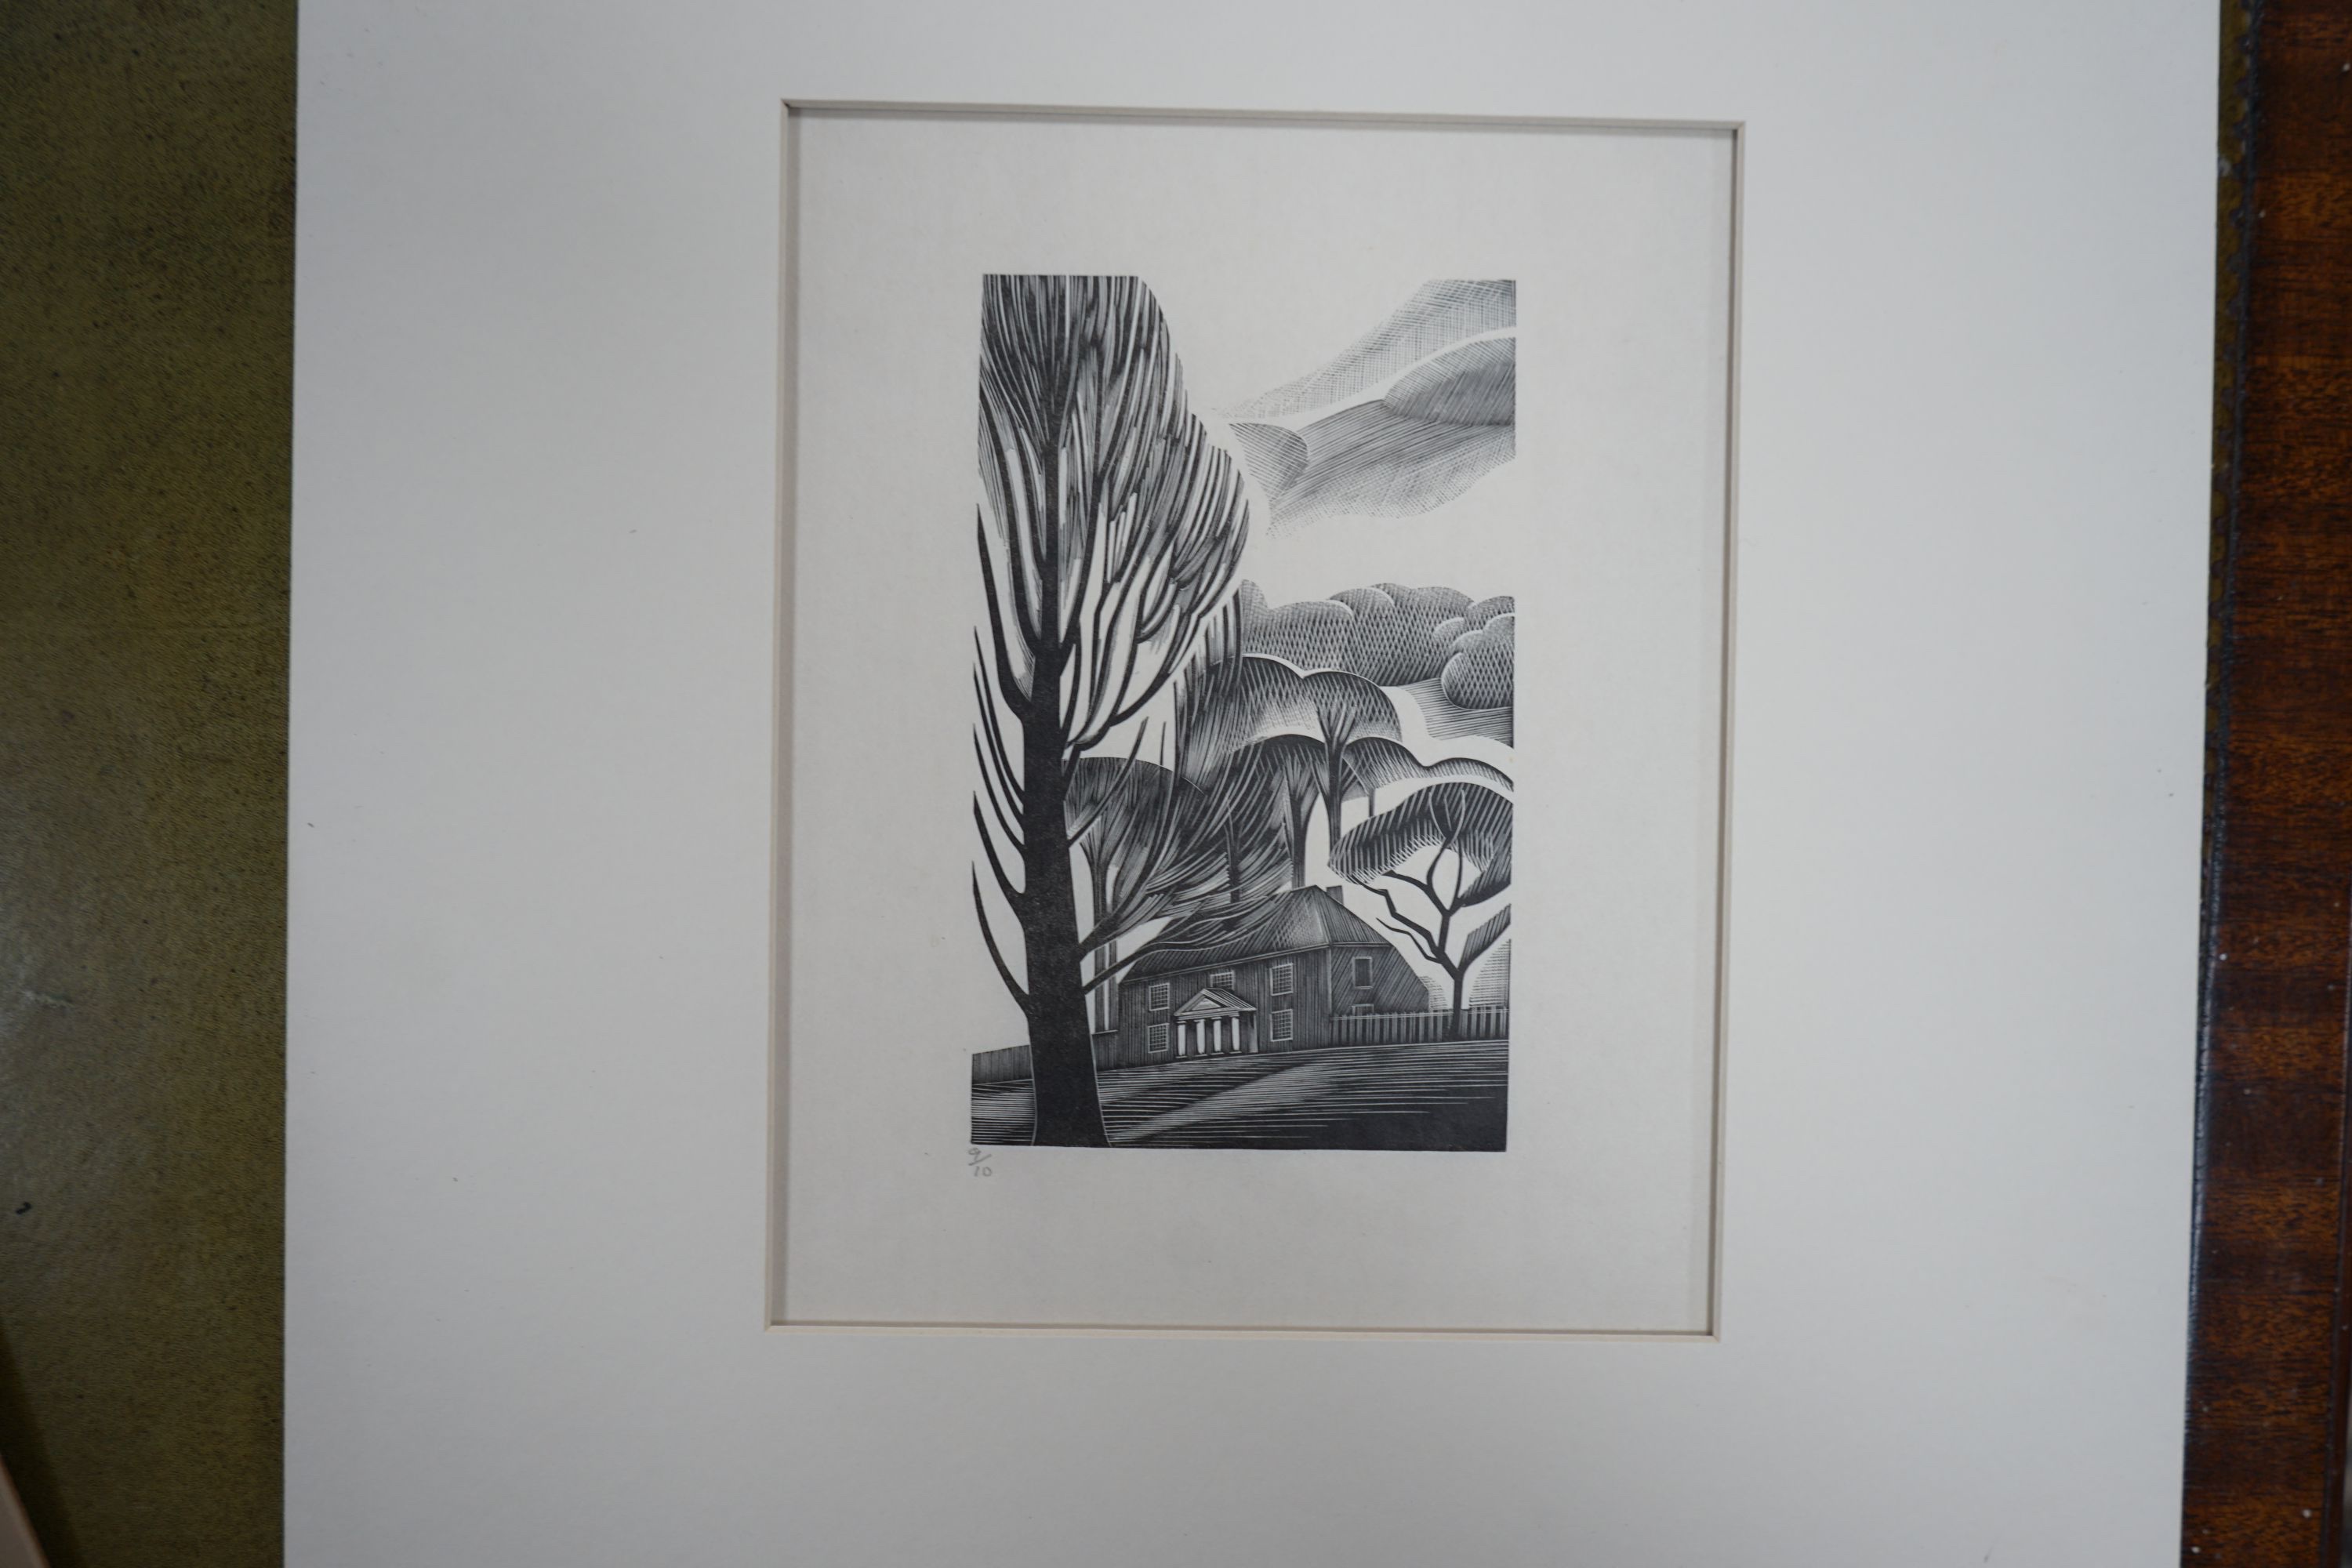 John Farleigh (1900-1965), four woodblock prints, Dhalia, Apples, Yew Trees and another Yew Trees, all numbered in pencil, largest 34 x 24cm, unframed